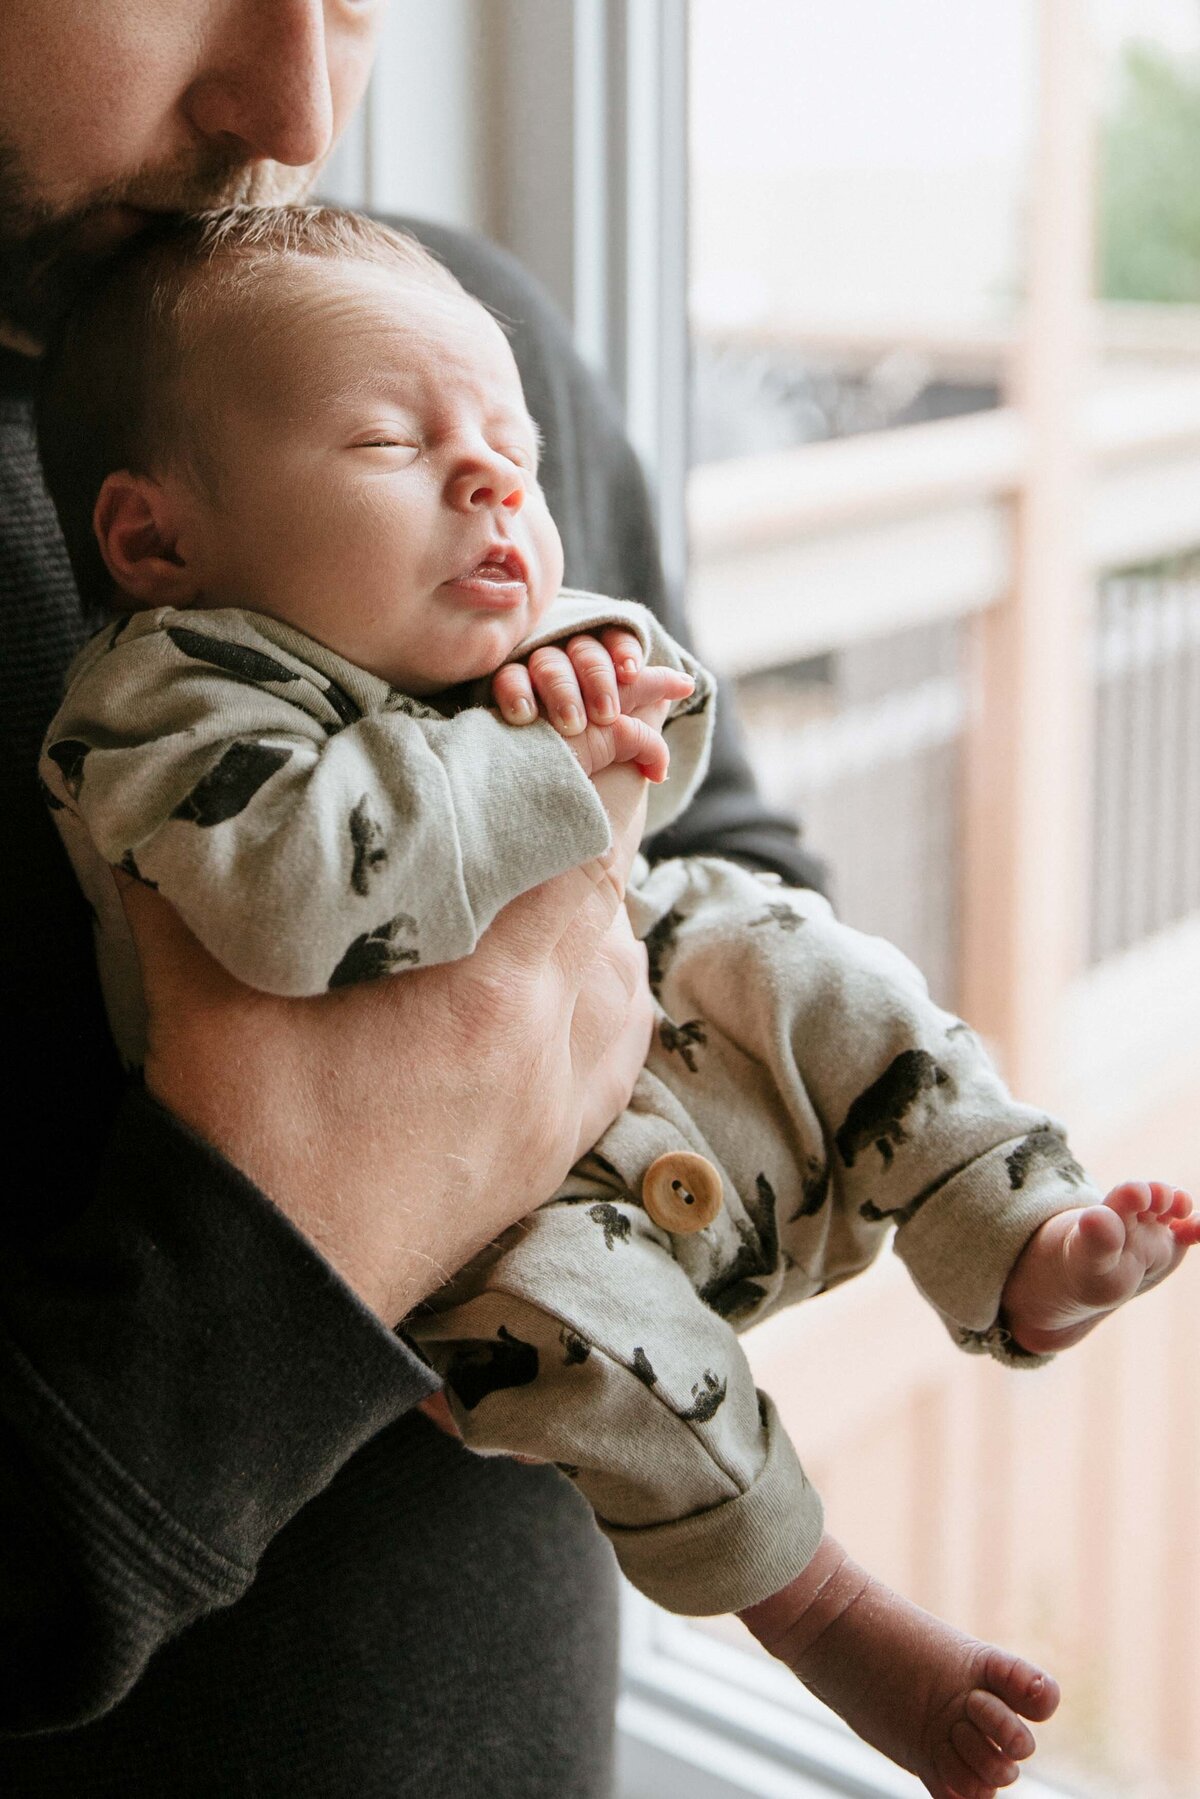 In-home newborn session - Dad holding baby against his chest baby facing outward toward the window. Baby curled up in a onesie